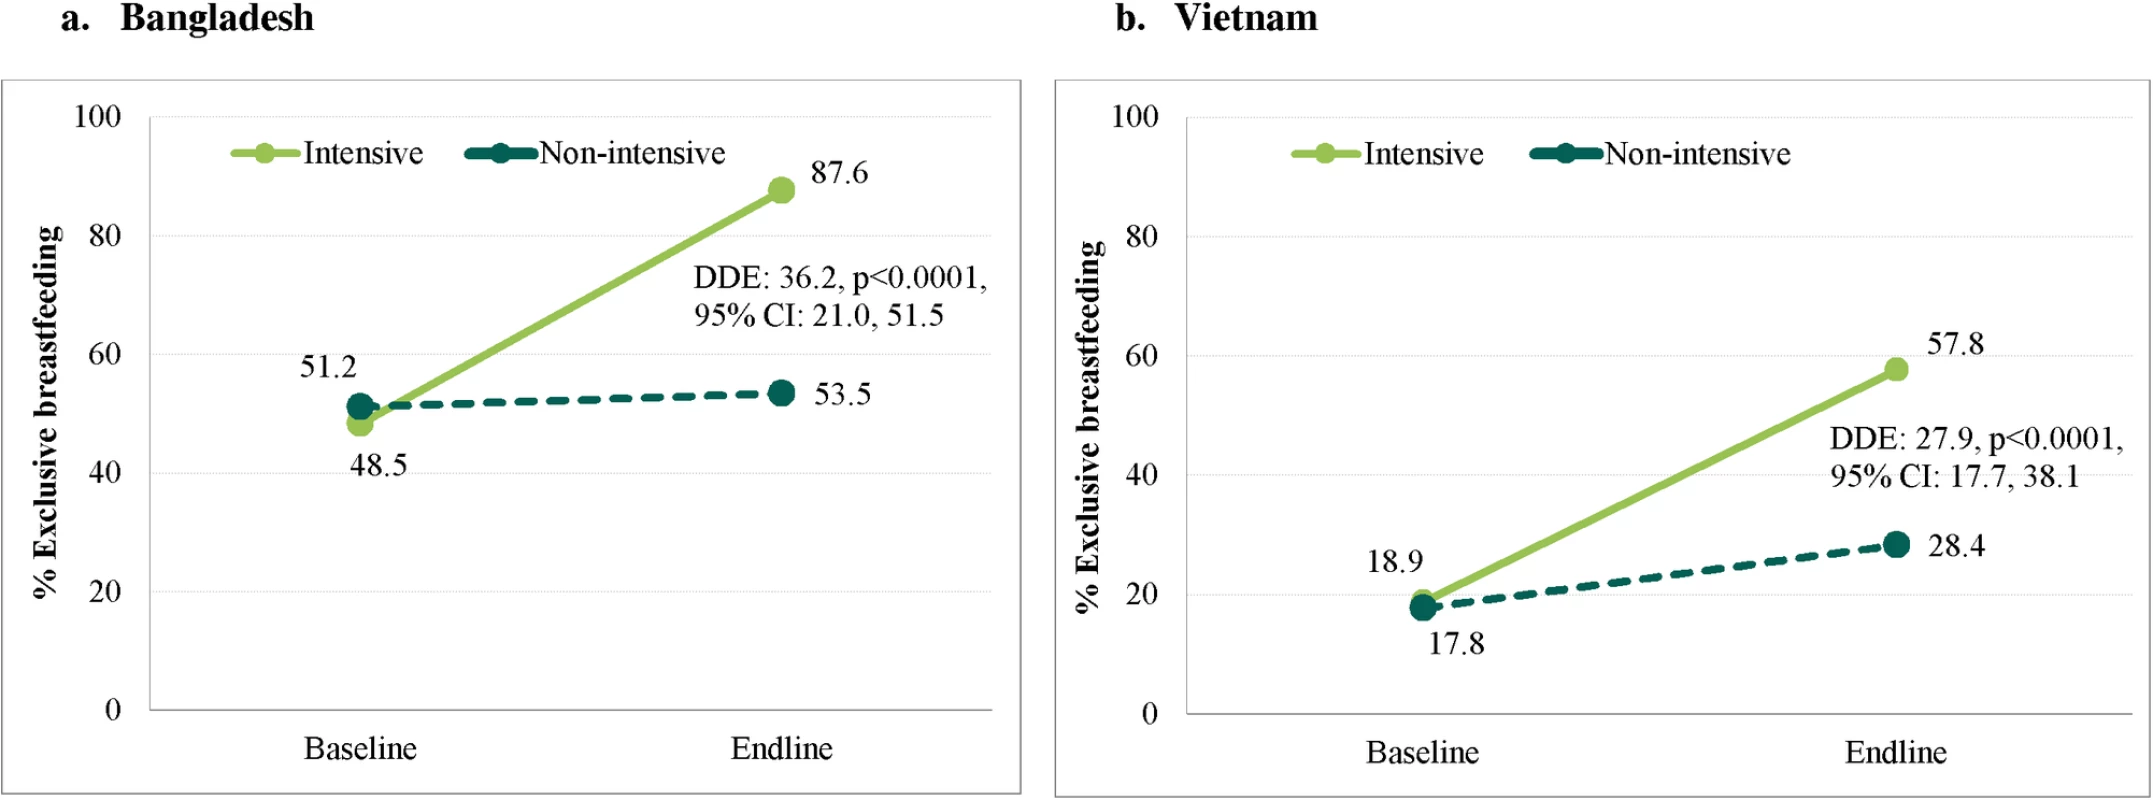 Prevalence of exclusive breastfeeding practices by program and survey round in Bangladesh and Viet Nam.